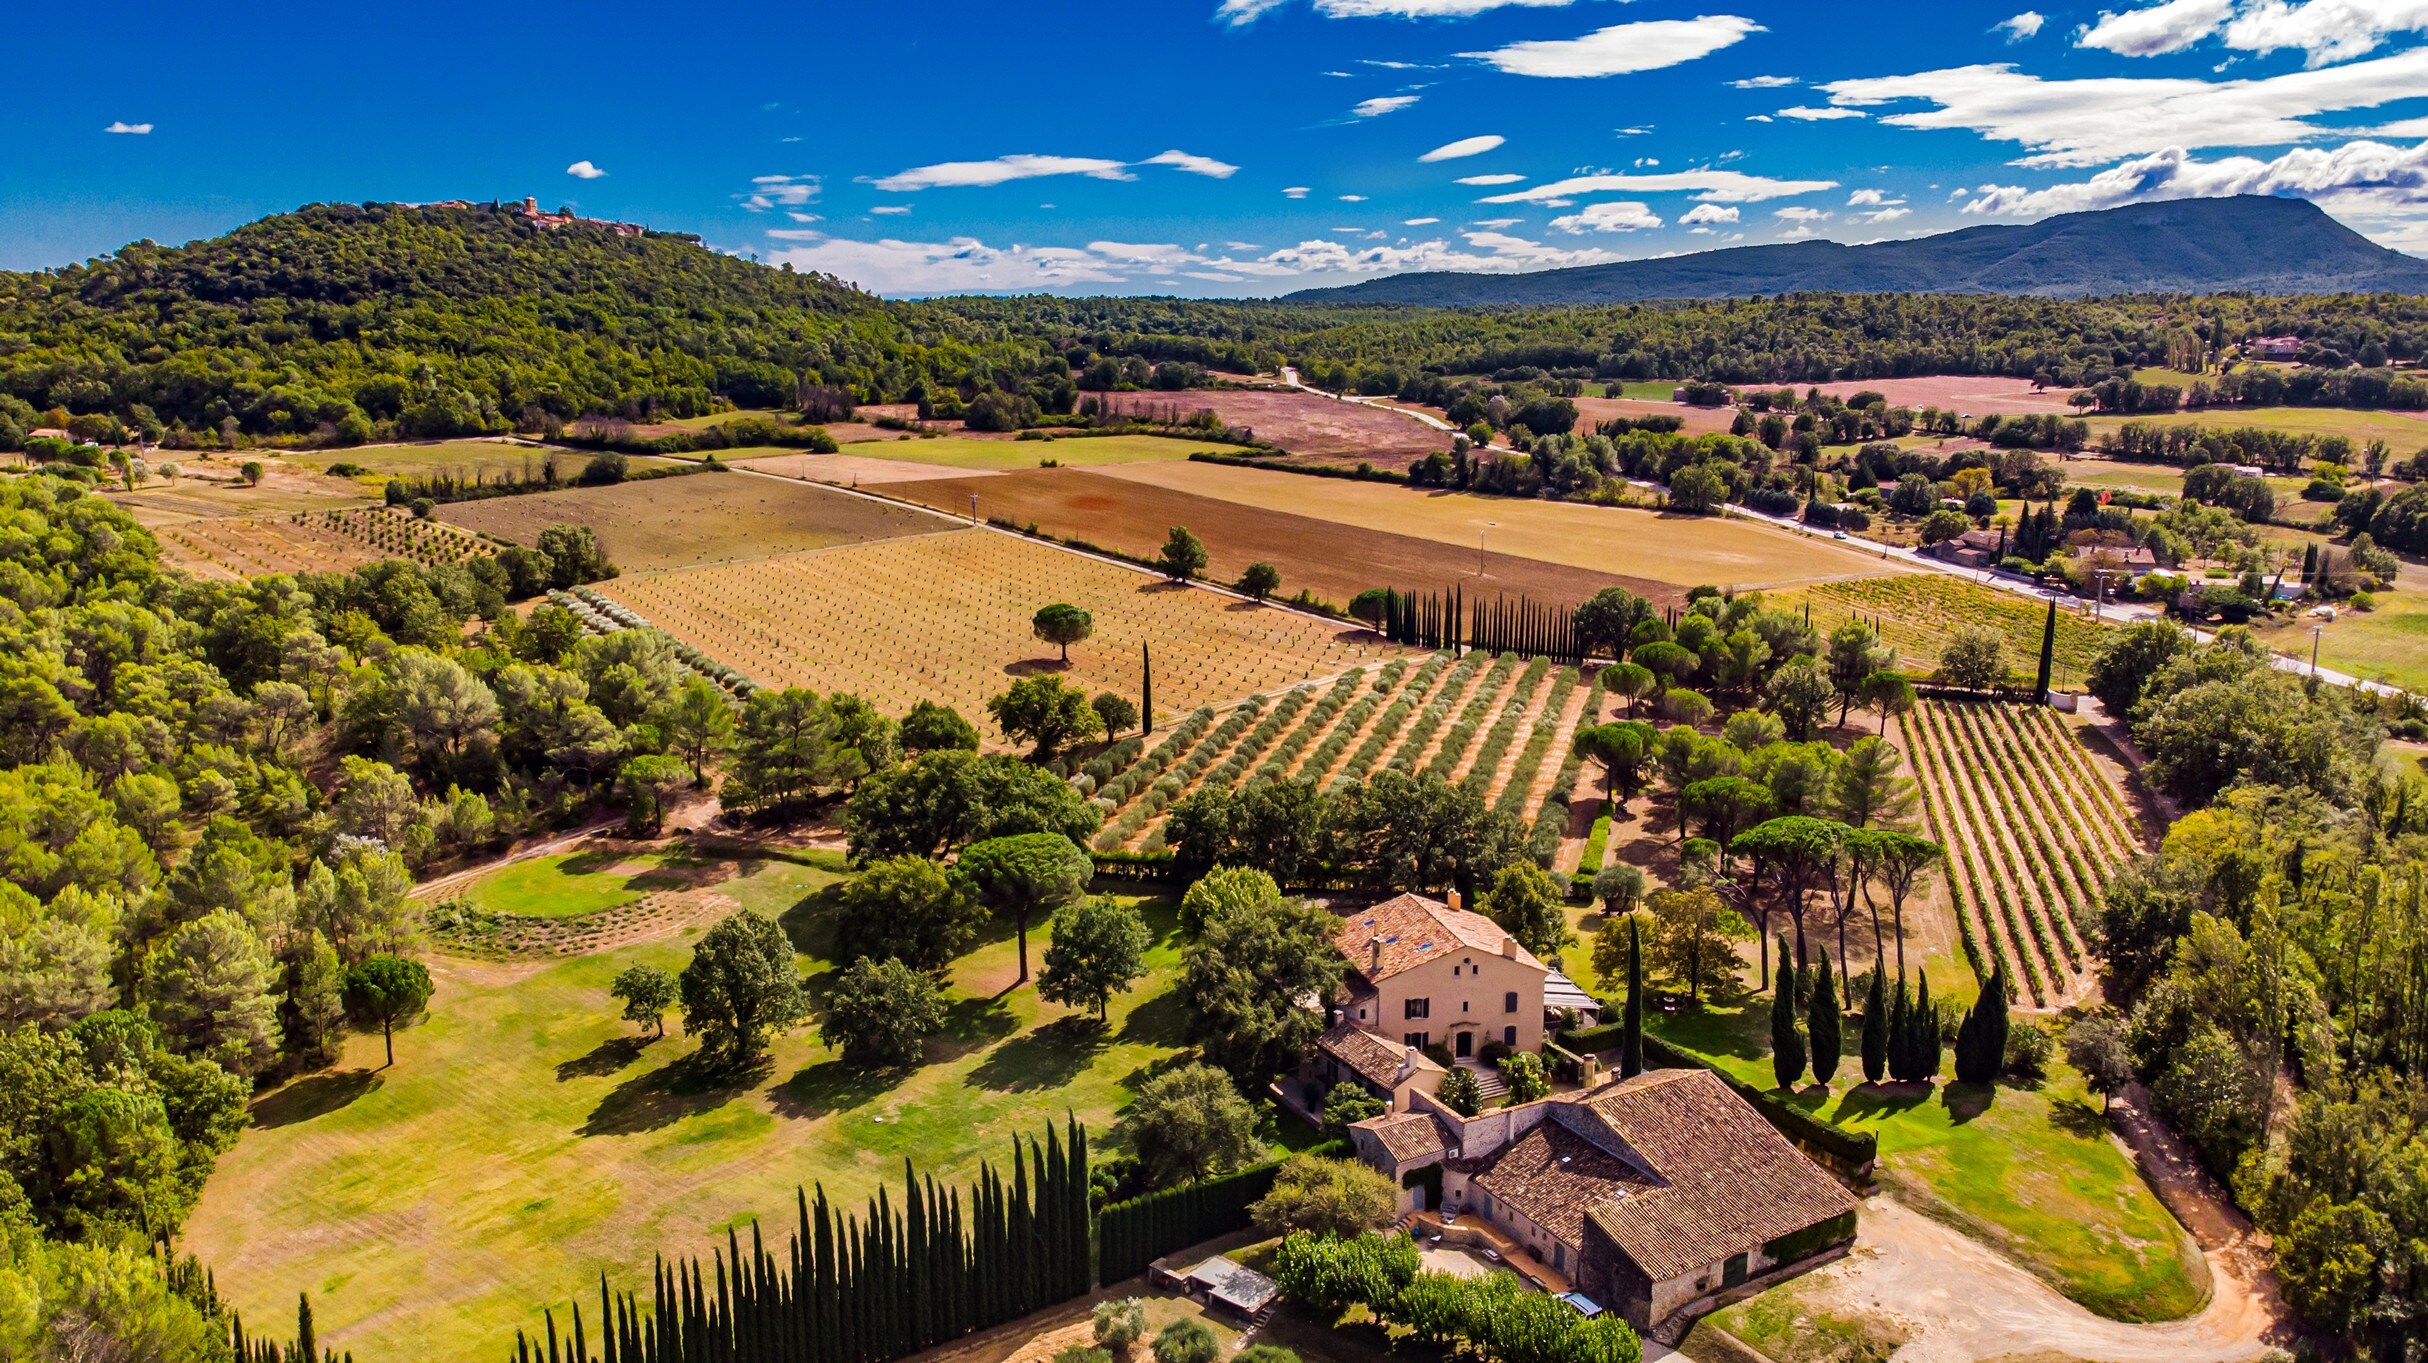 Property Image 2 - Fabulous 18th-century country bastide with 7 bedrooms, heated pool, tennis court and helipad